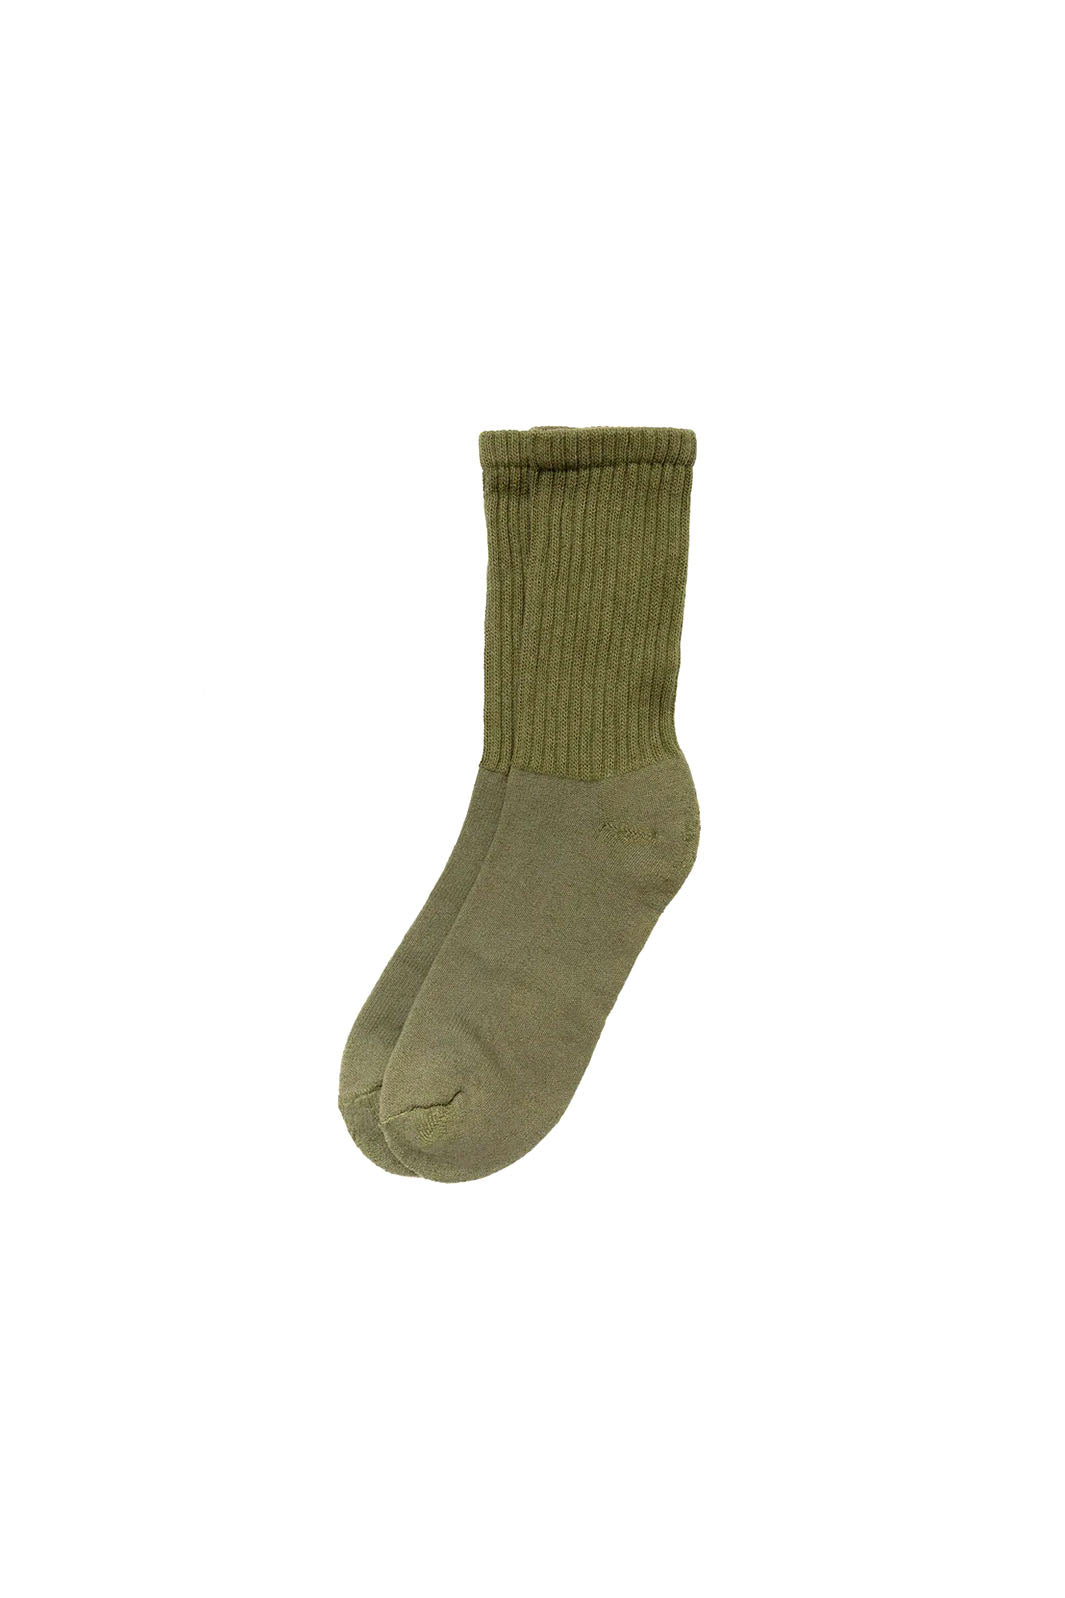 The Solids Sock - Olive